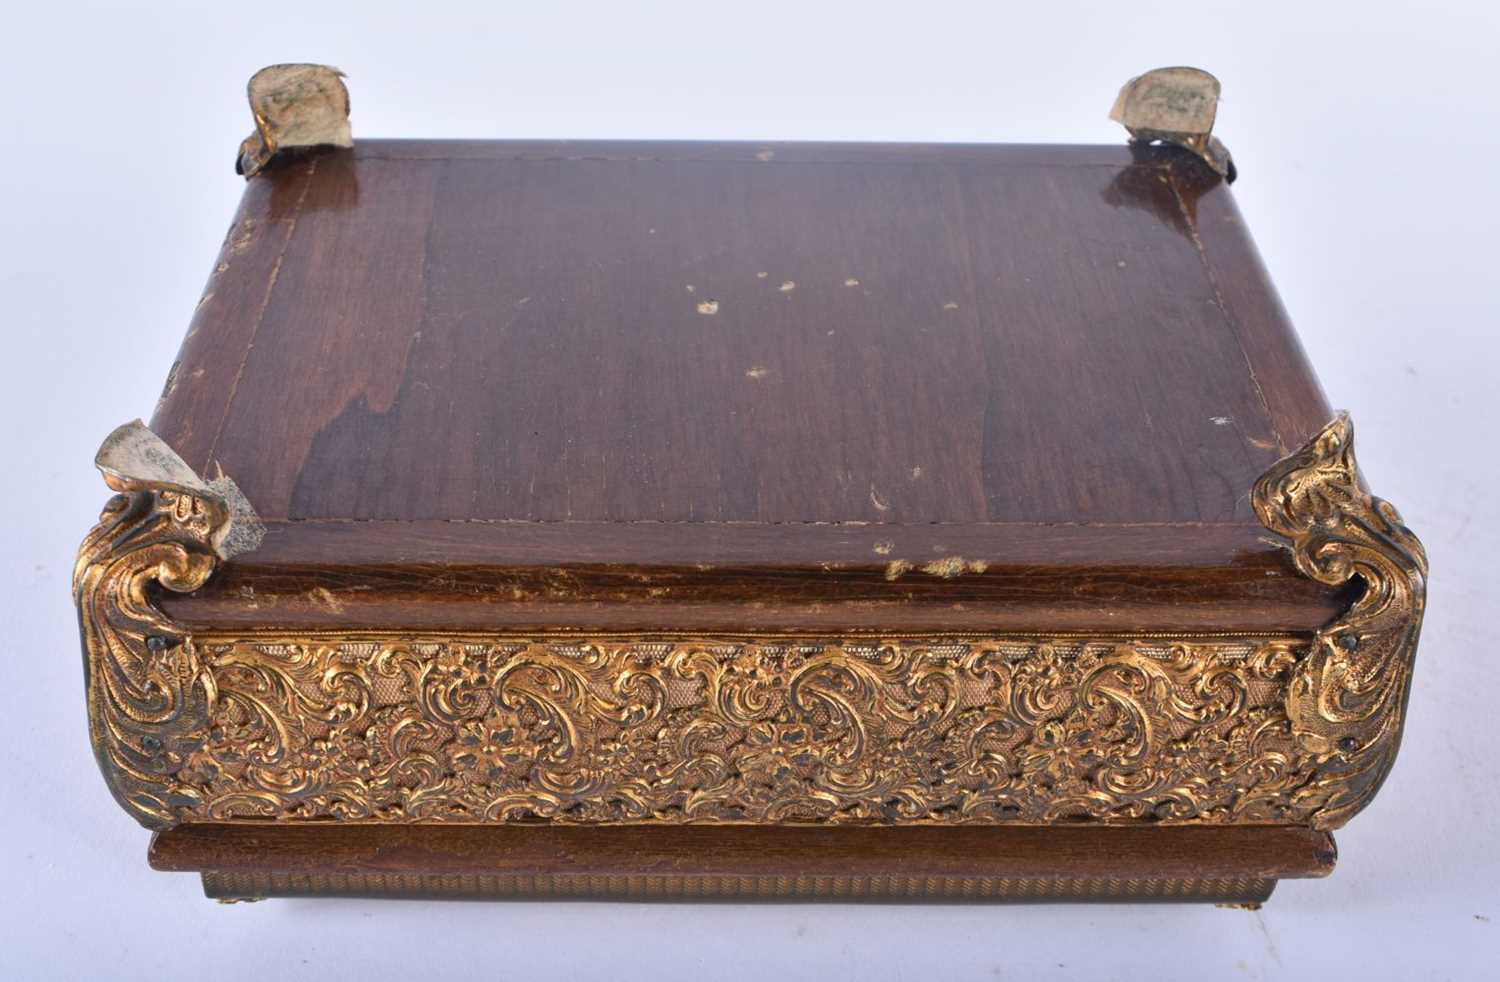 A LARGE EARLY VICTORIAN MAHOGANY DOME TOP BOX together with a French gilt metal repousse casket, - Image 7 of 7